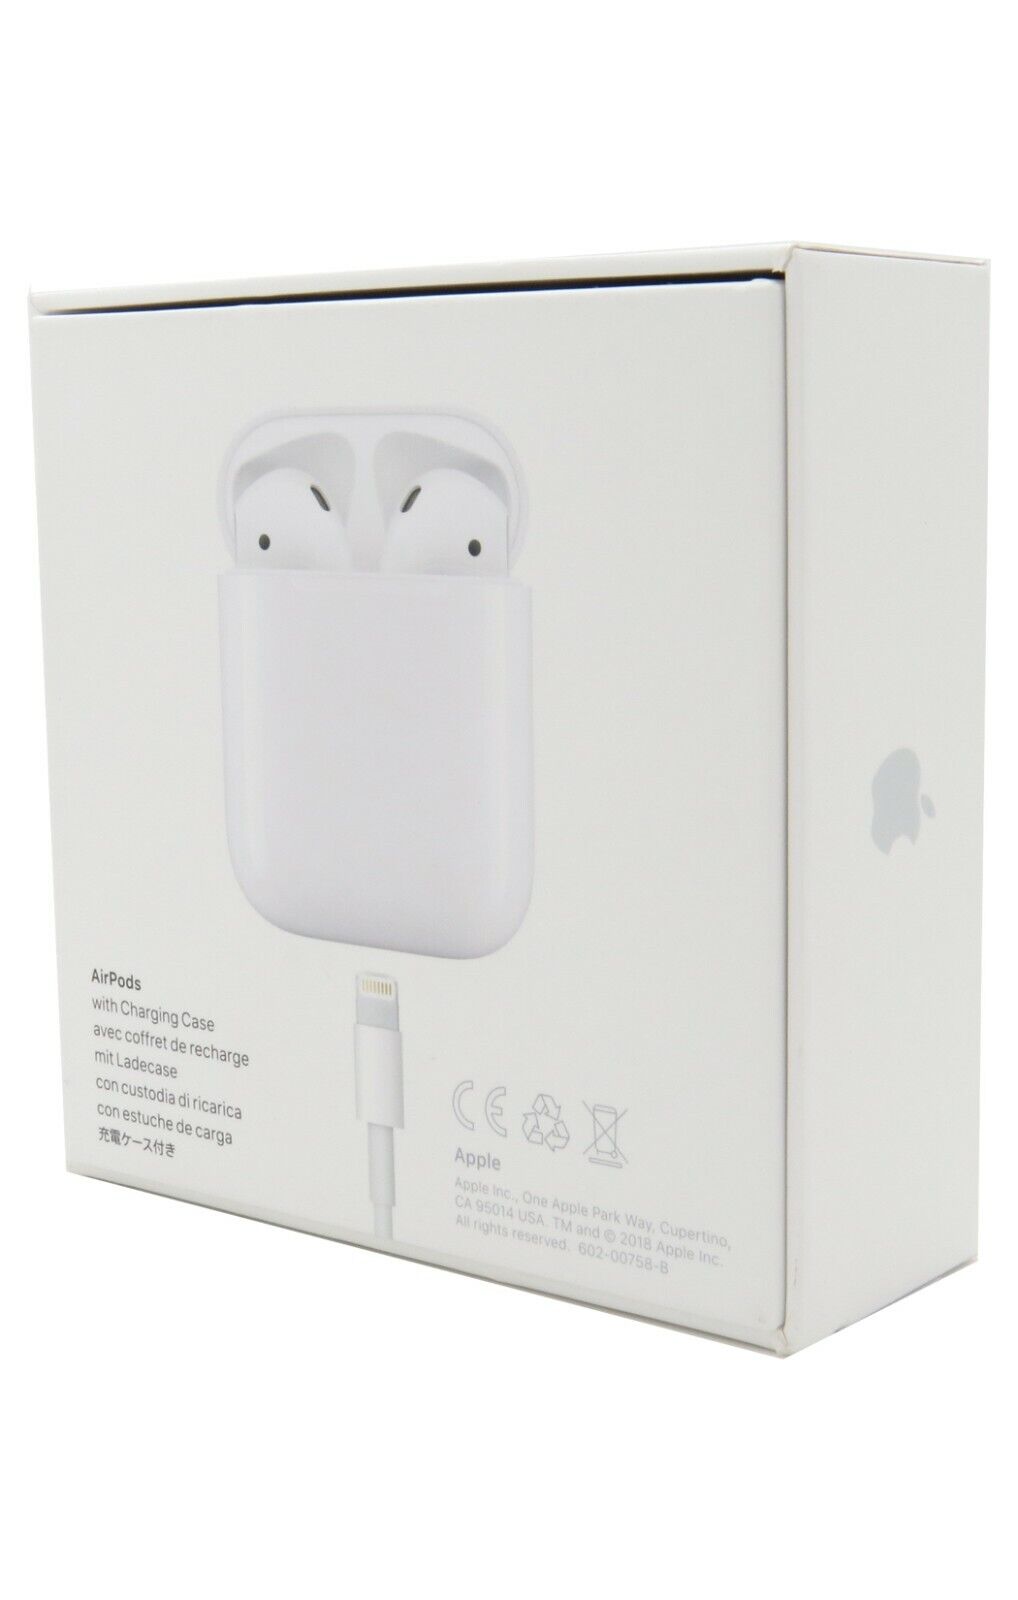 Apple AirPods 2nd Generation Wireless Earbuds & Charging Case MV7N2AM/A H1